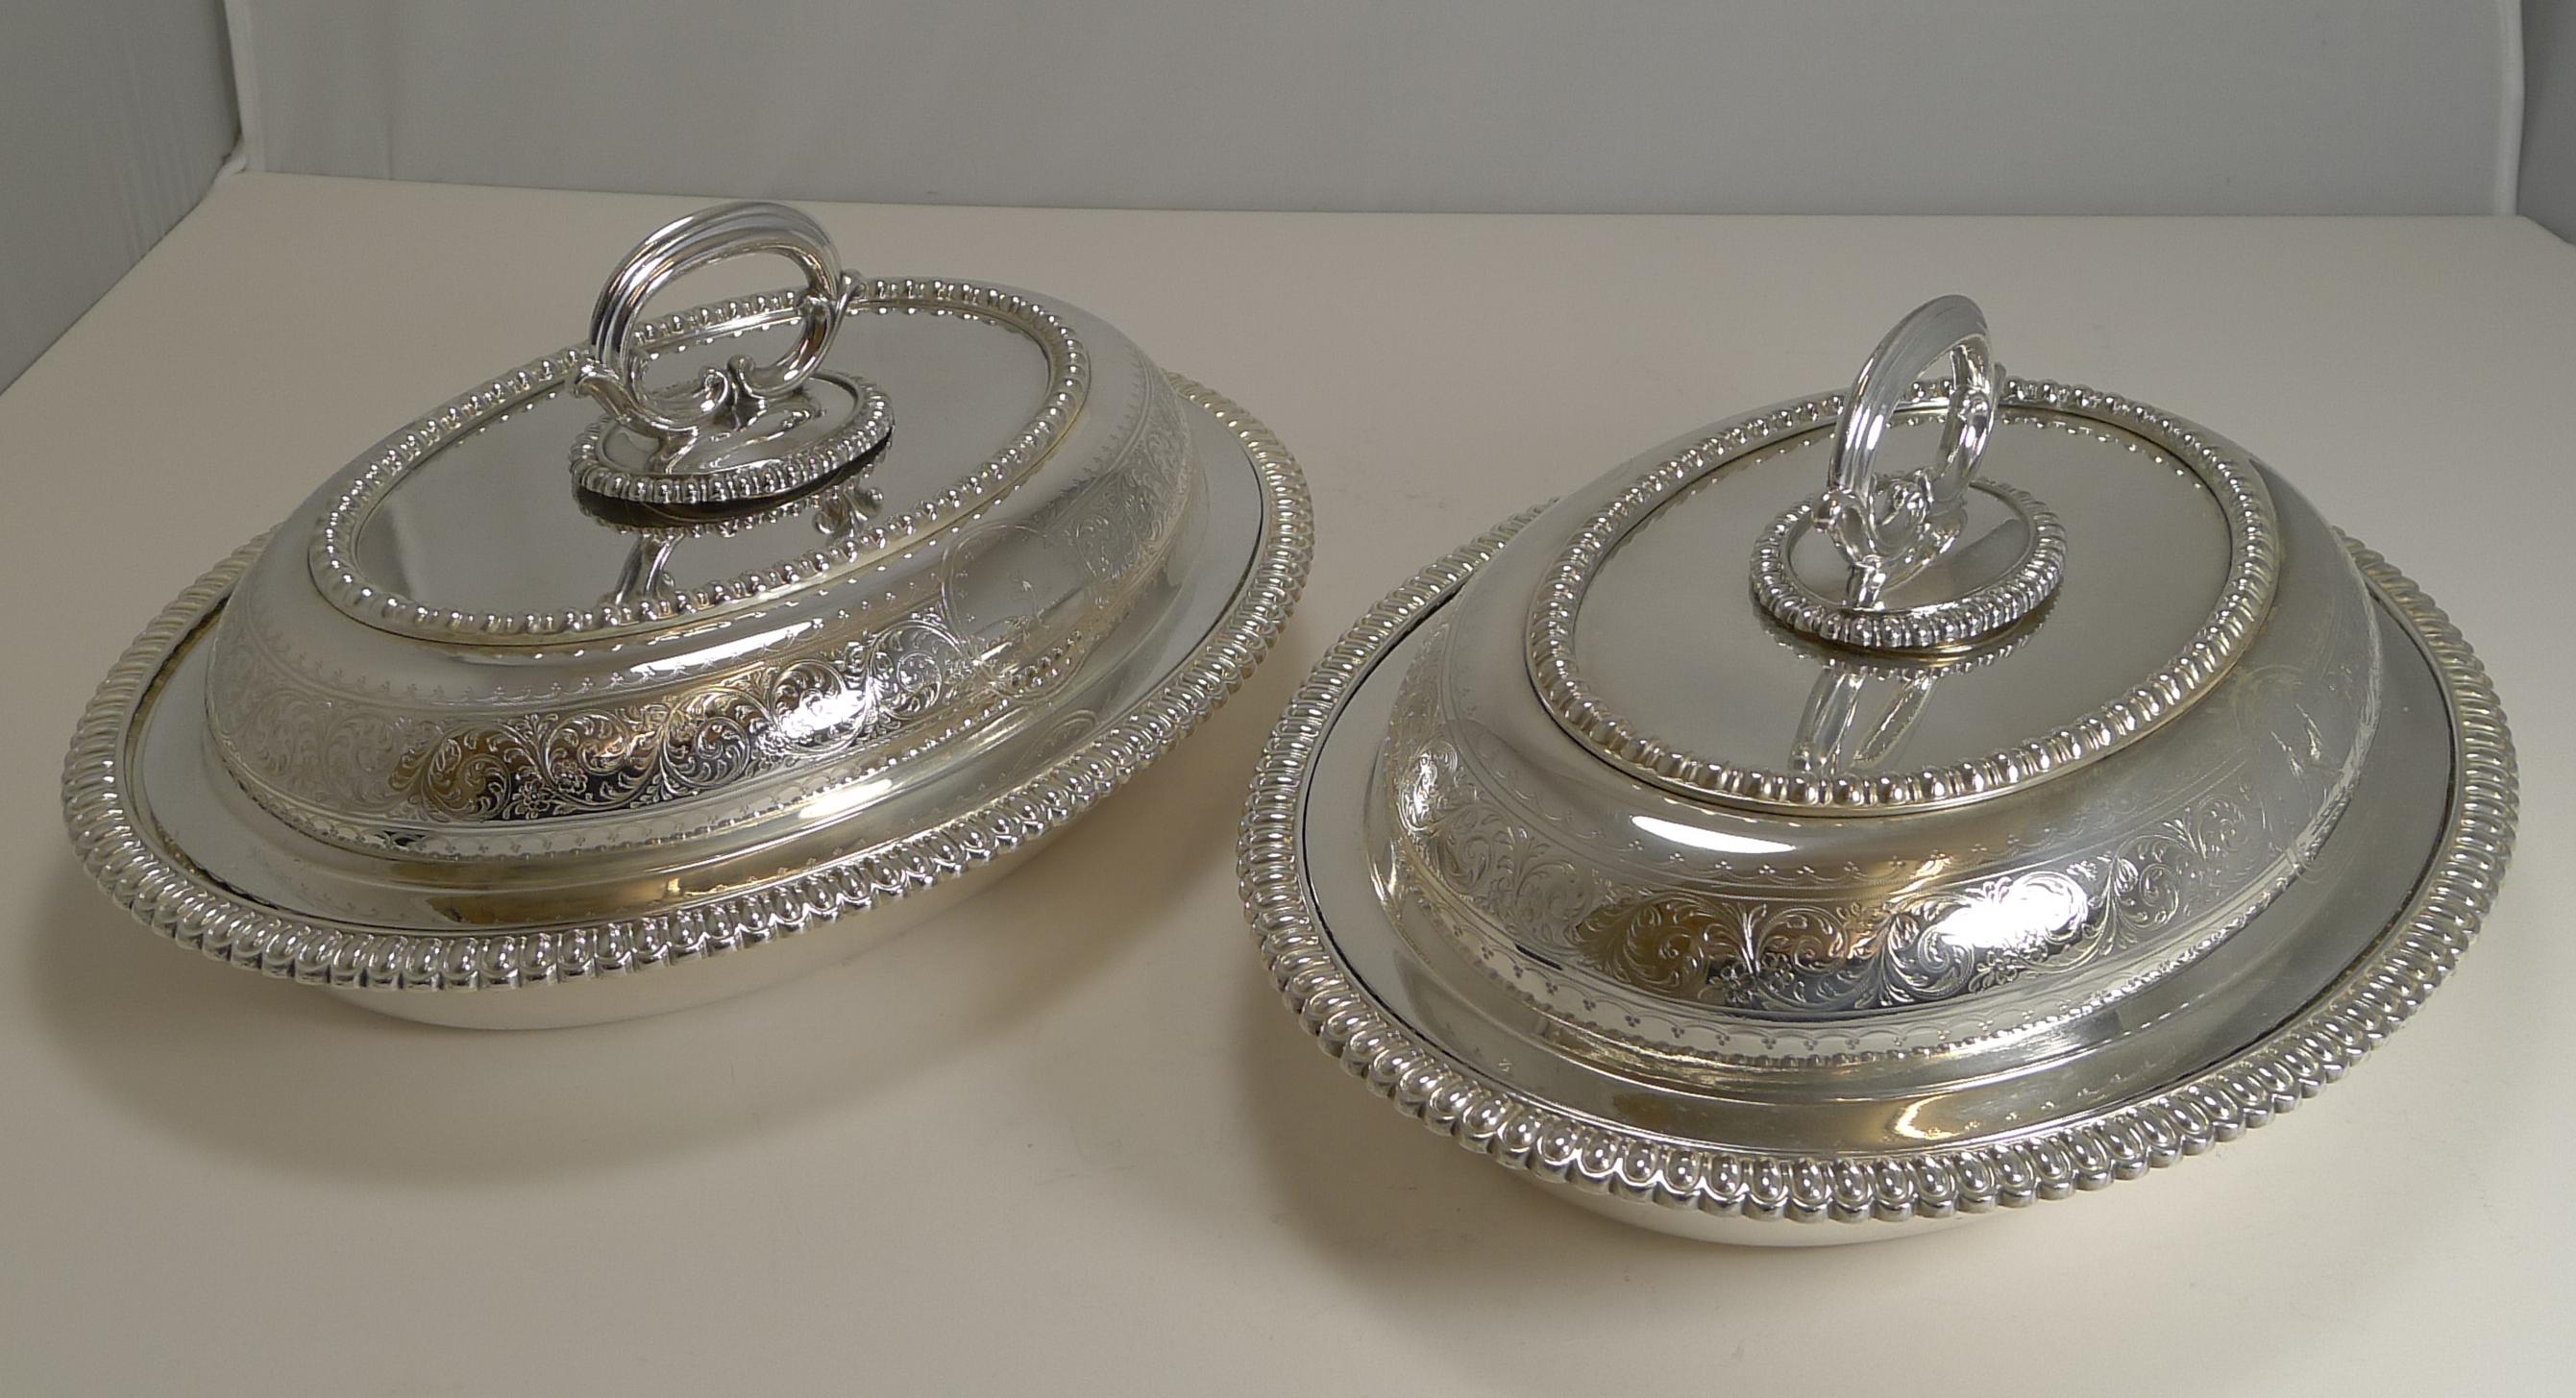 Late Victorian Pair of Elkington Silver Plated Entree/Serving Dishes, 1884